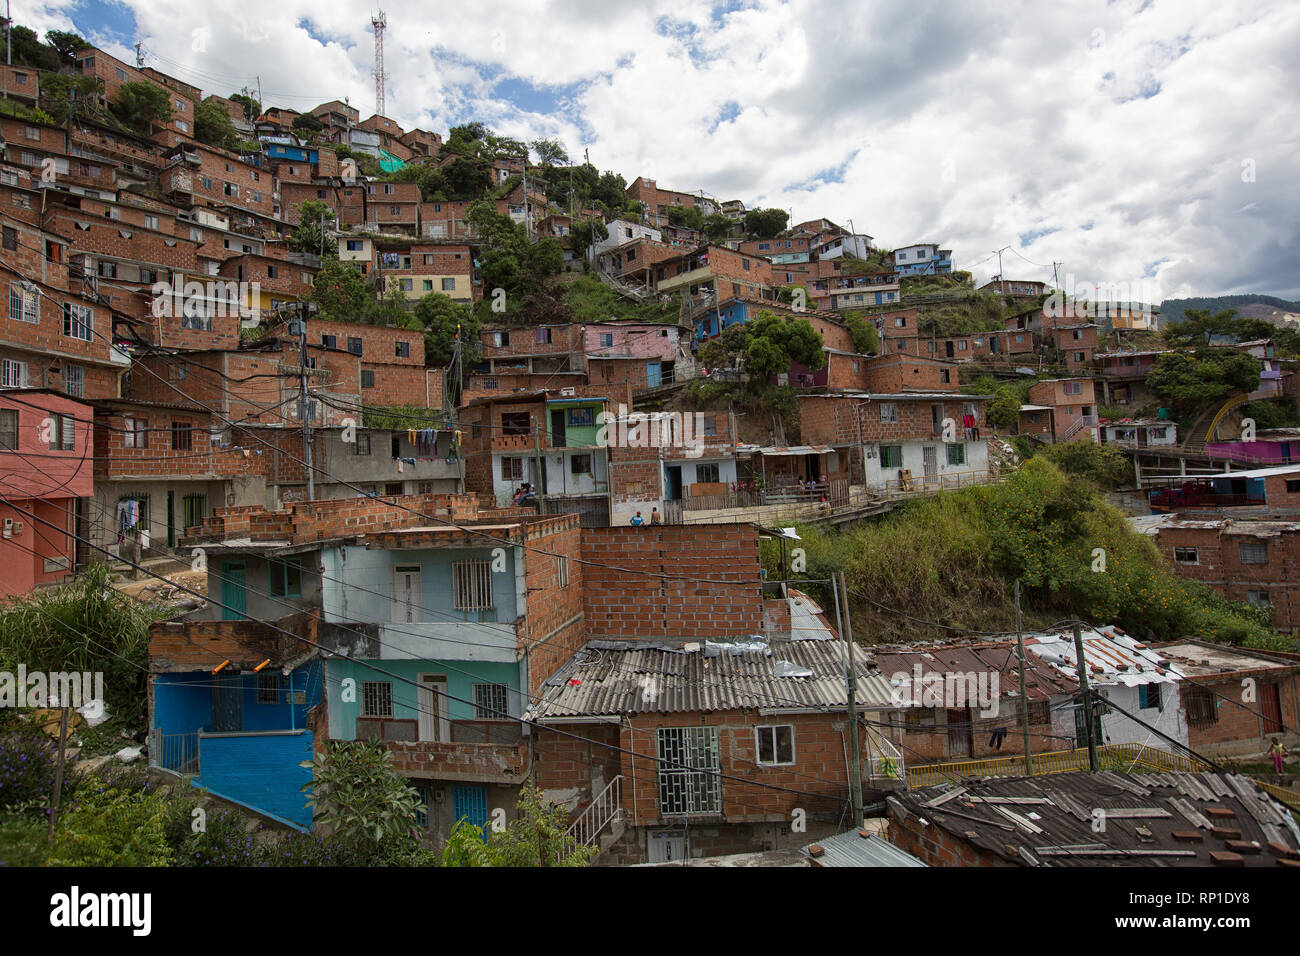 Medellin, Colombia - August 20, 2018: houses built on moiuntin side in the famous 13 district of the city Stock Photo